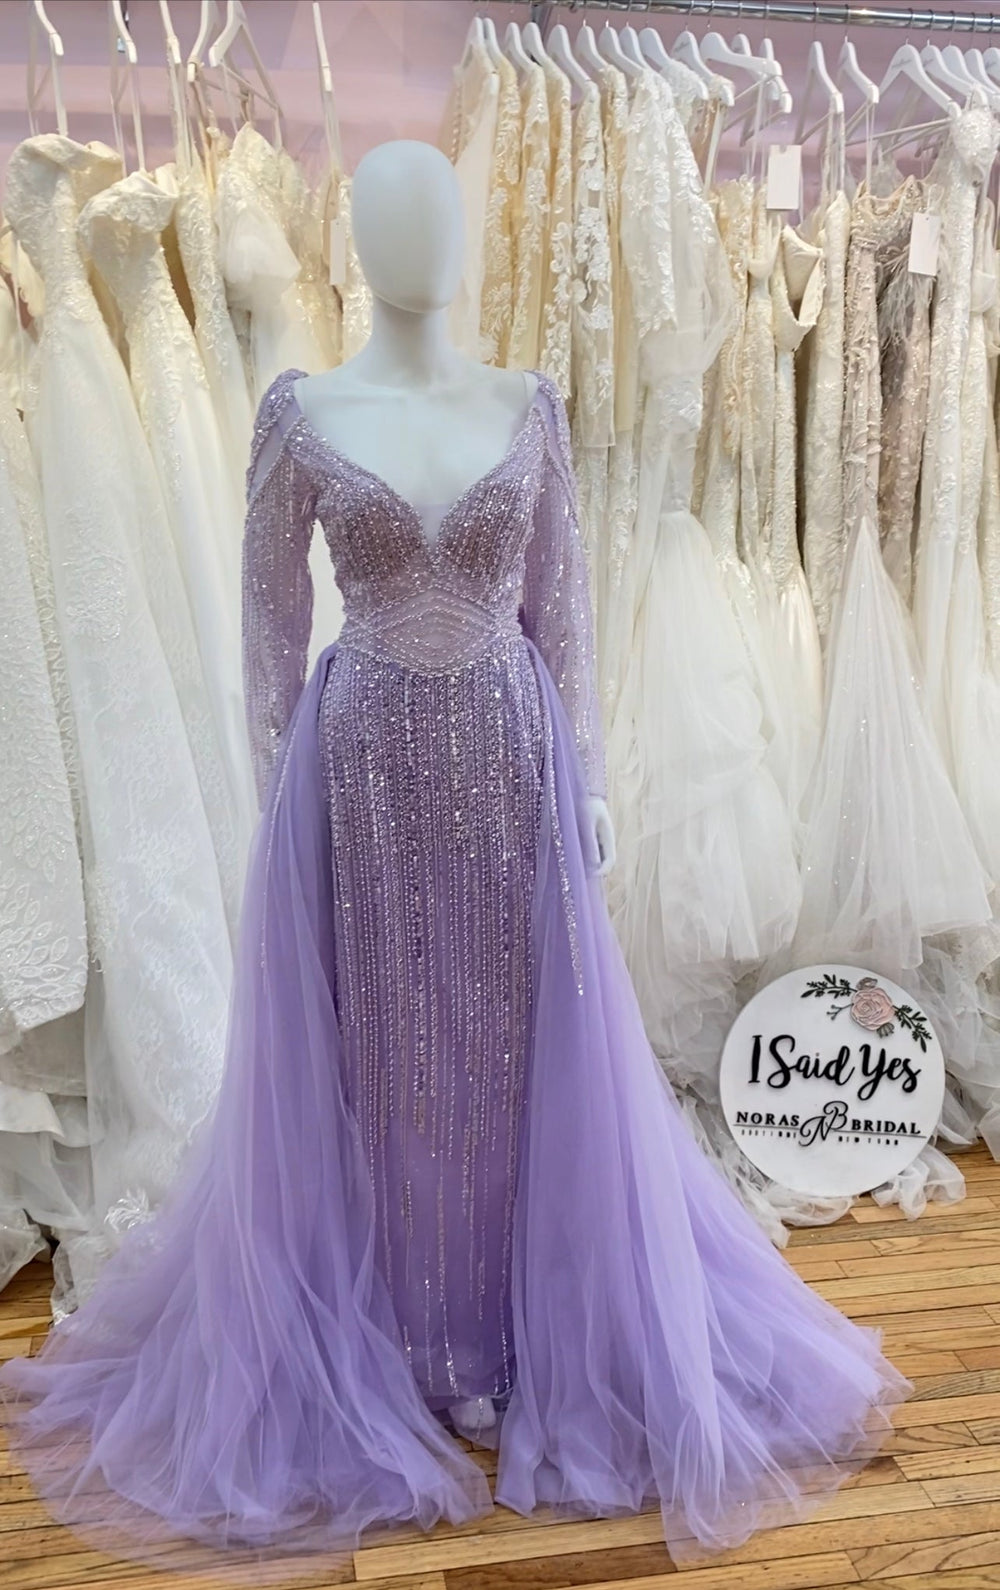 NoraCoutureNY evening dress The Violeta Gown custom made by NoraCoutureNY